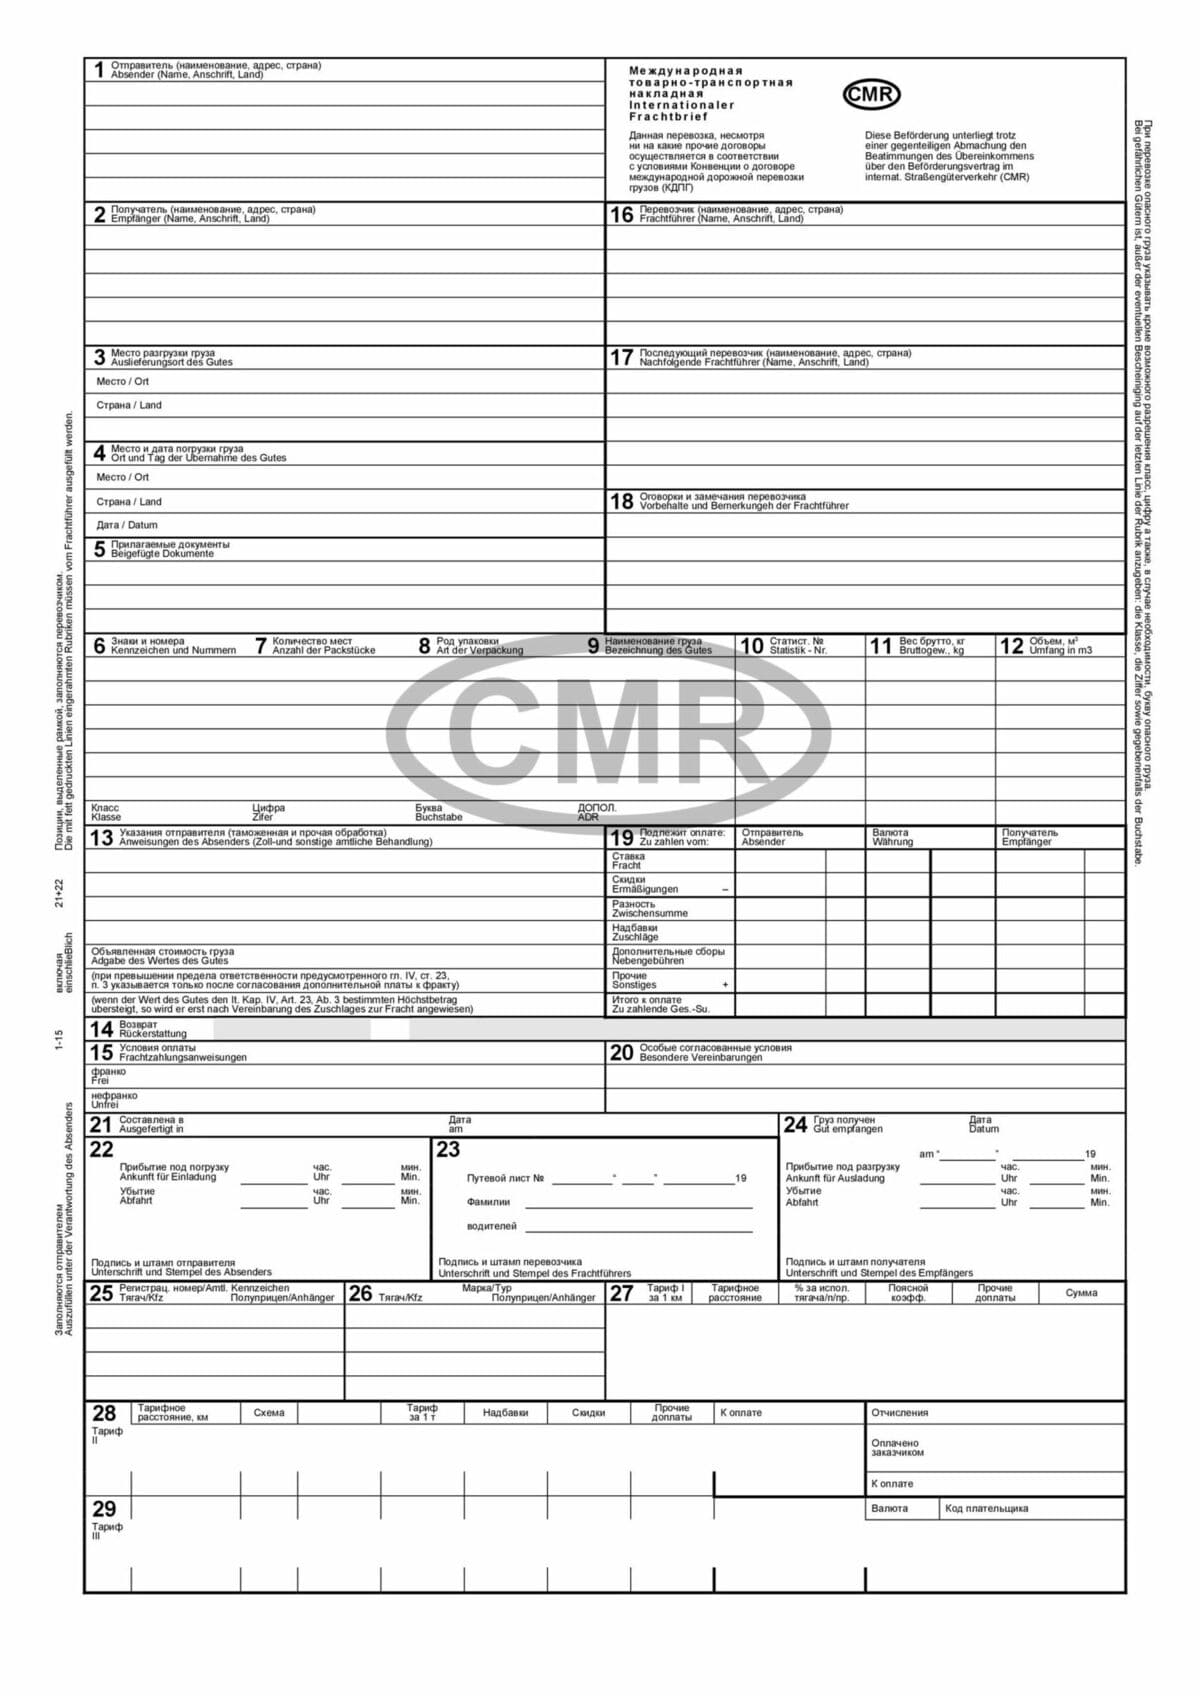 Sample CMR consignment note - DiFreight